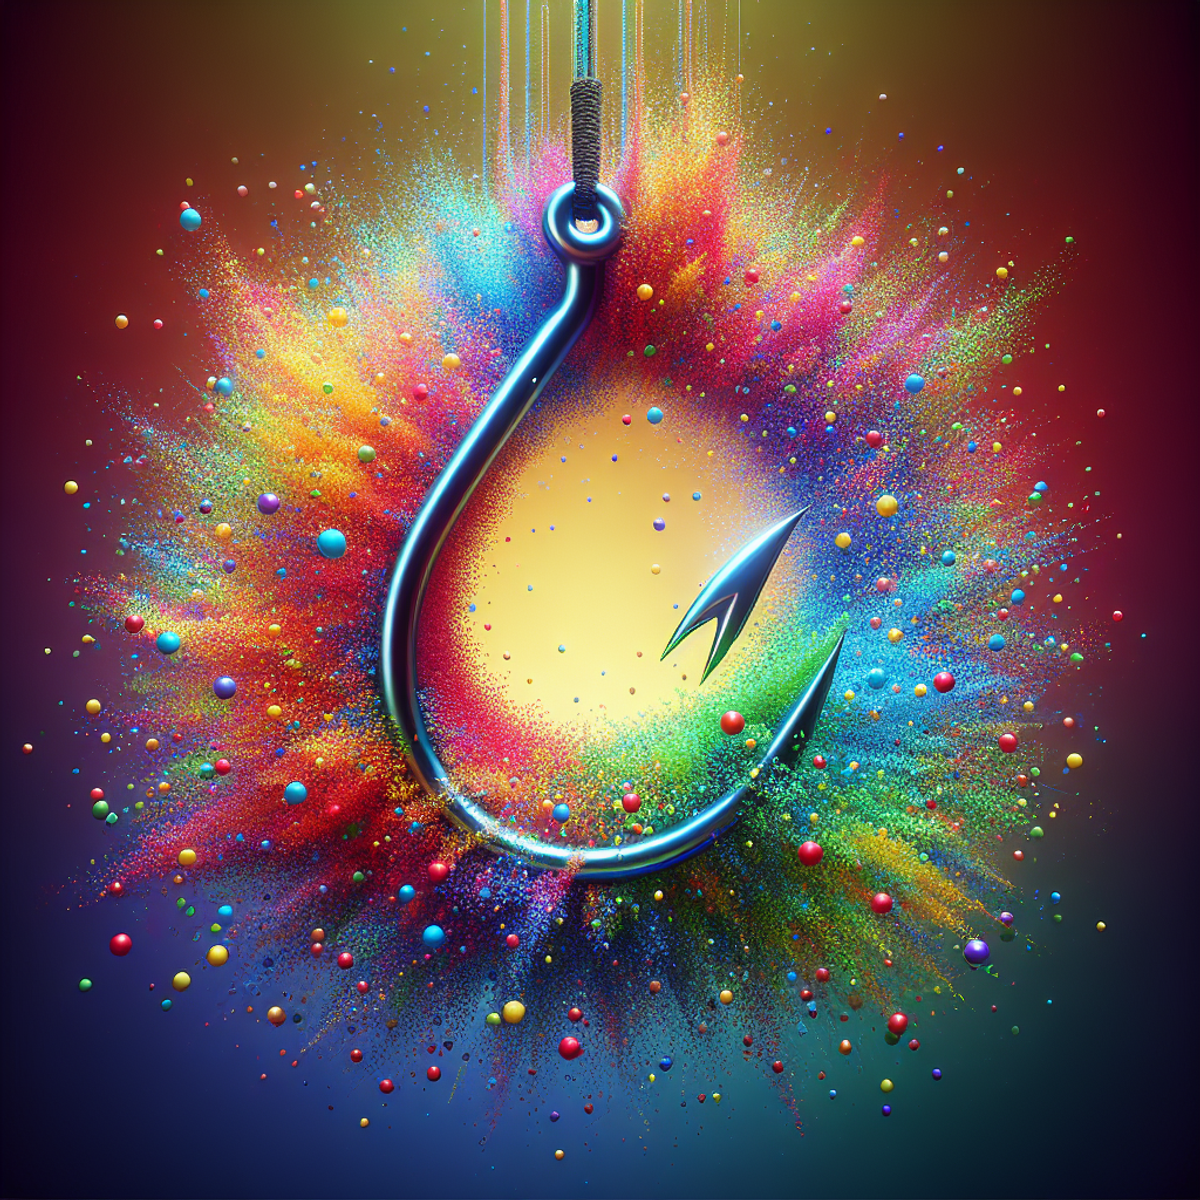 Fishing hook surrounded by colorful confetti, symbolizing an AI Hook Generator.